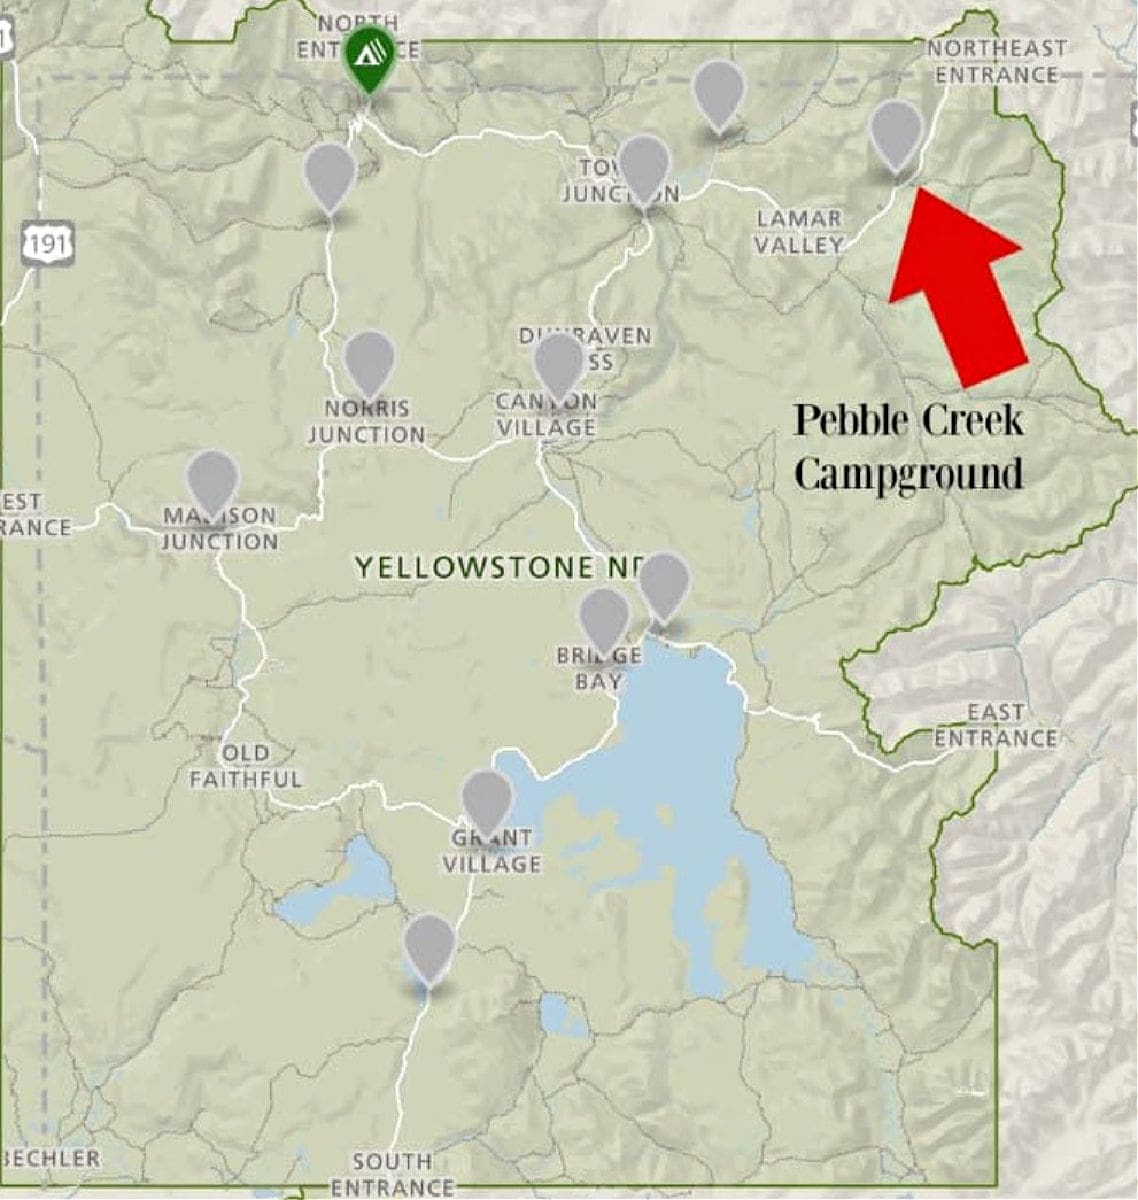 Where is Pebble Creek Campground located in Yellowstone National Park map